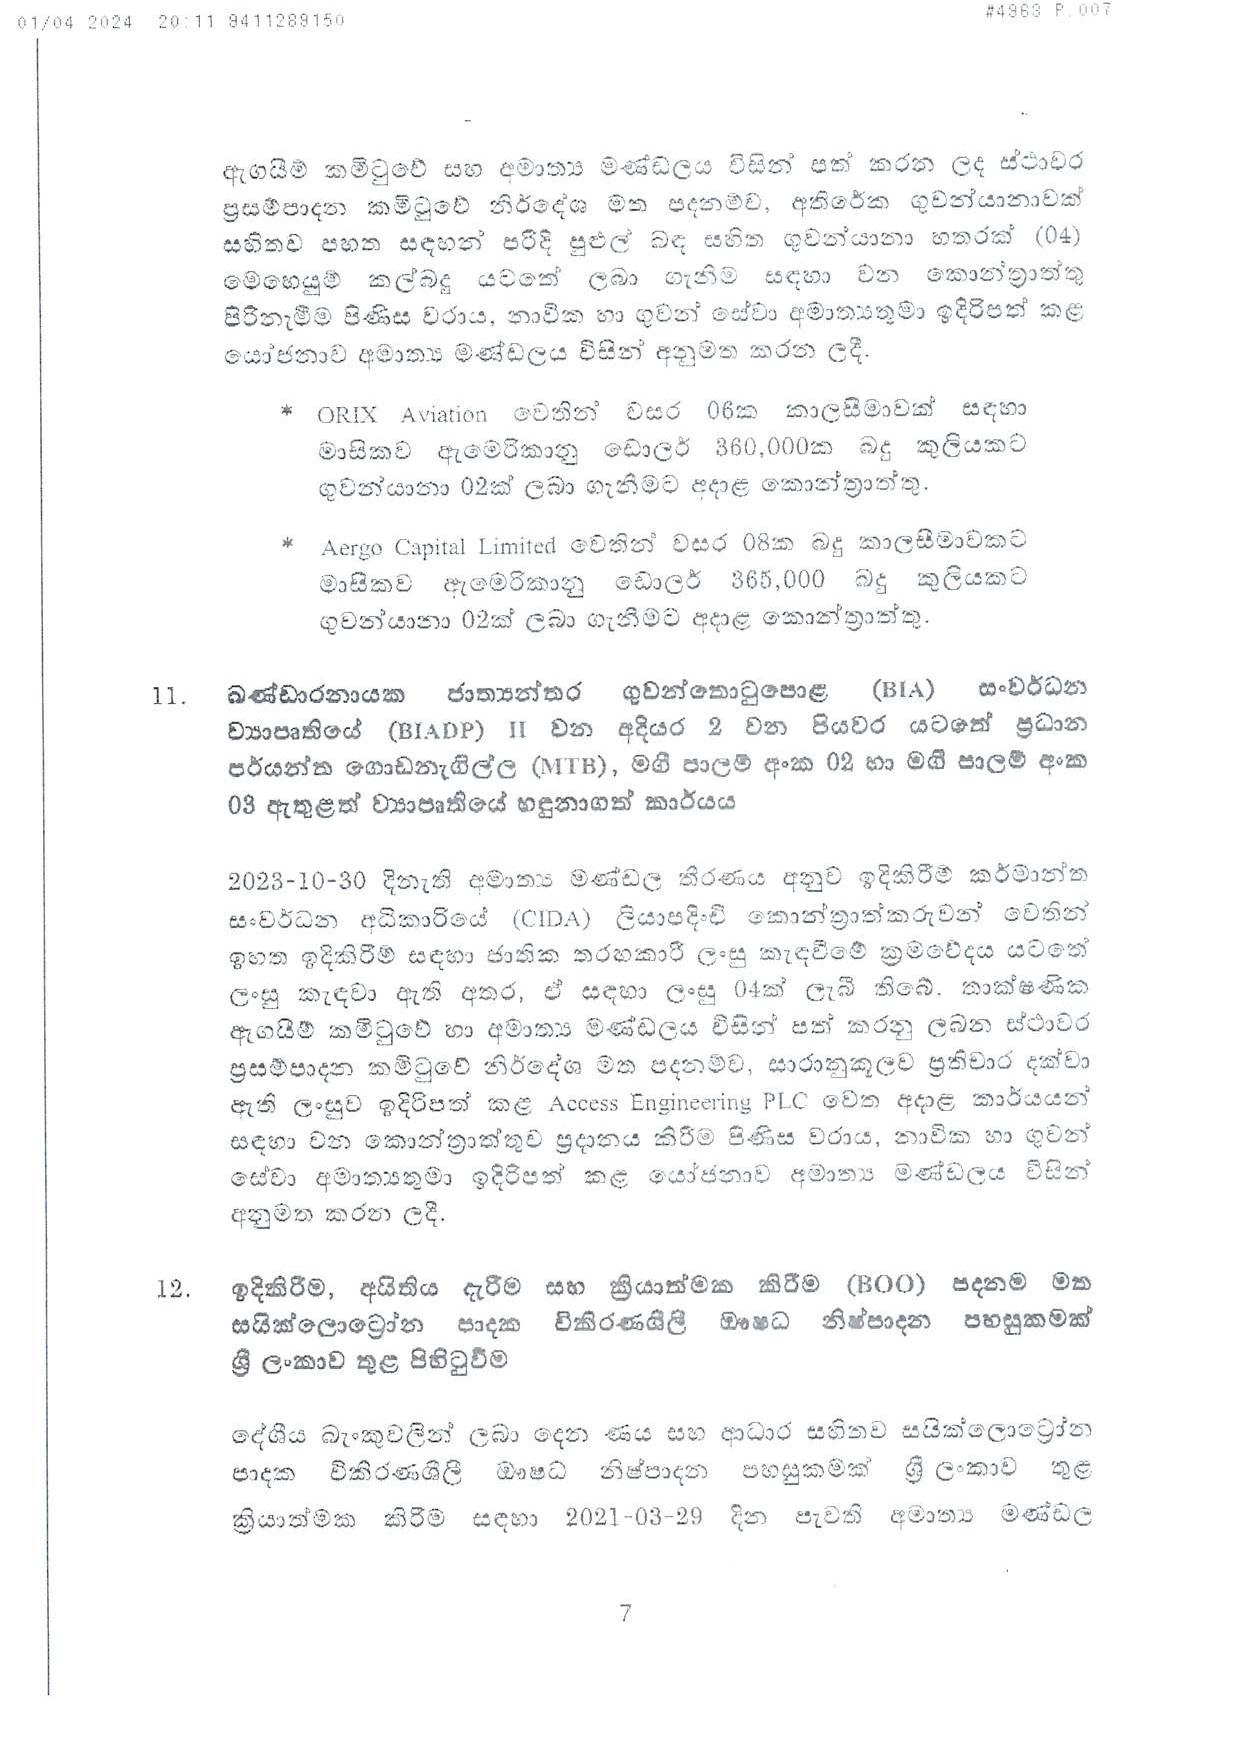 Cabinet Decisions on 01.04.2024 compressed page 007